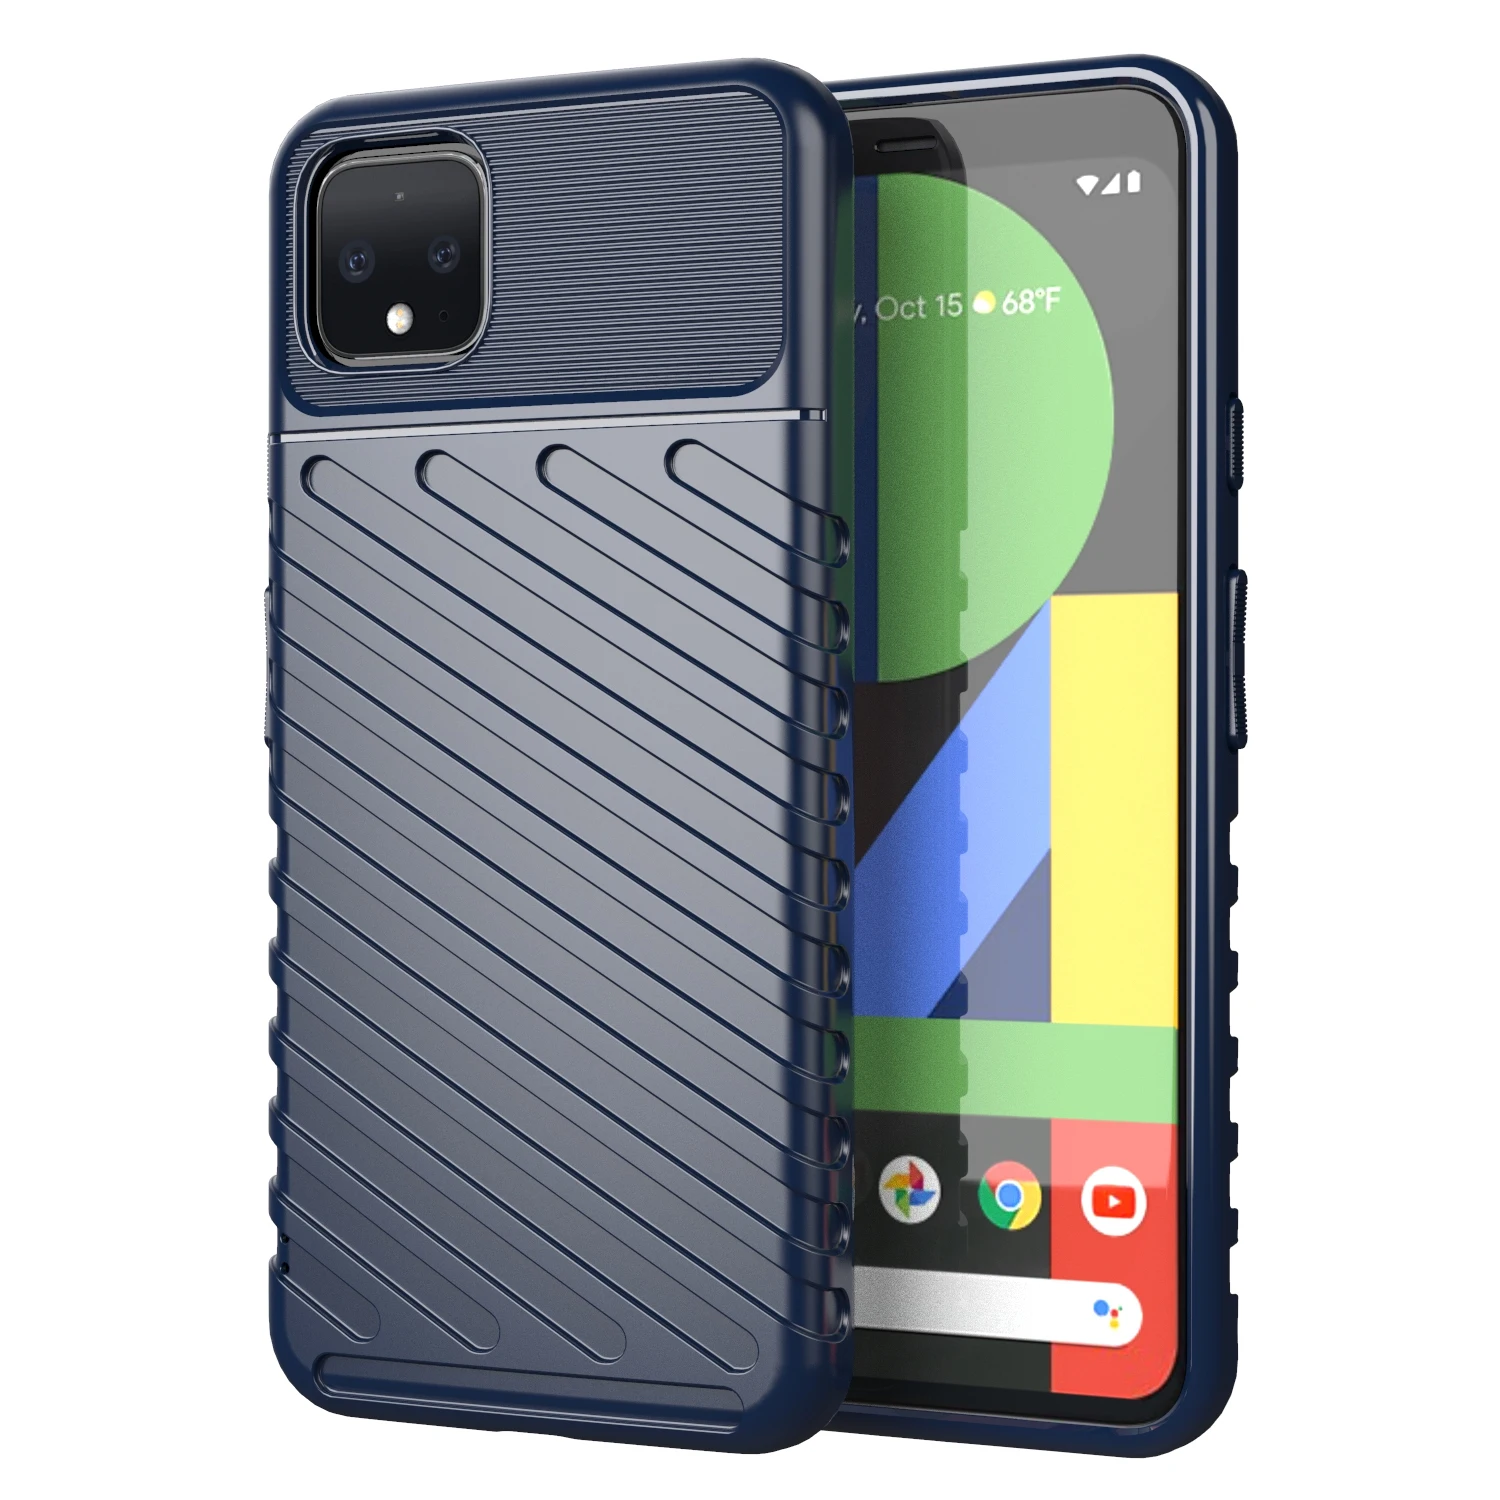 Fashion Non-Slip Thunder Case For Google Pixel 4 XL 4a 5g Shockproof Half-wrapped Cover for pixel 4 4xl 4a Full Protect Cases